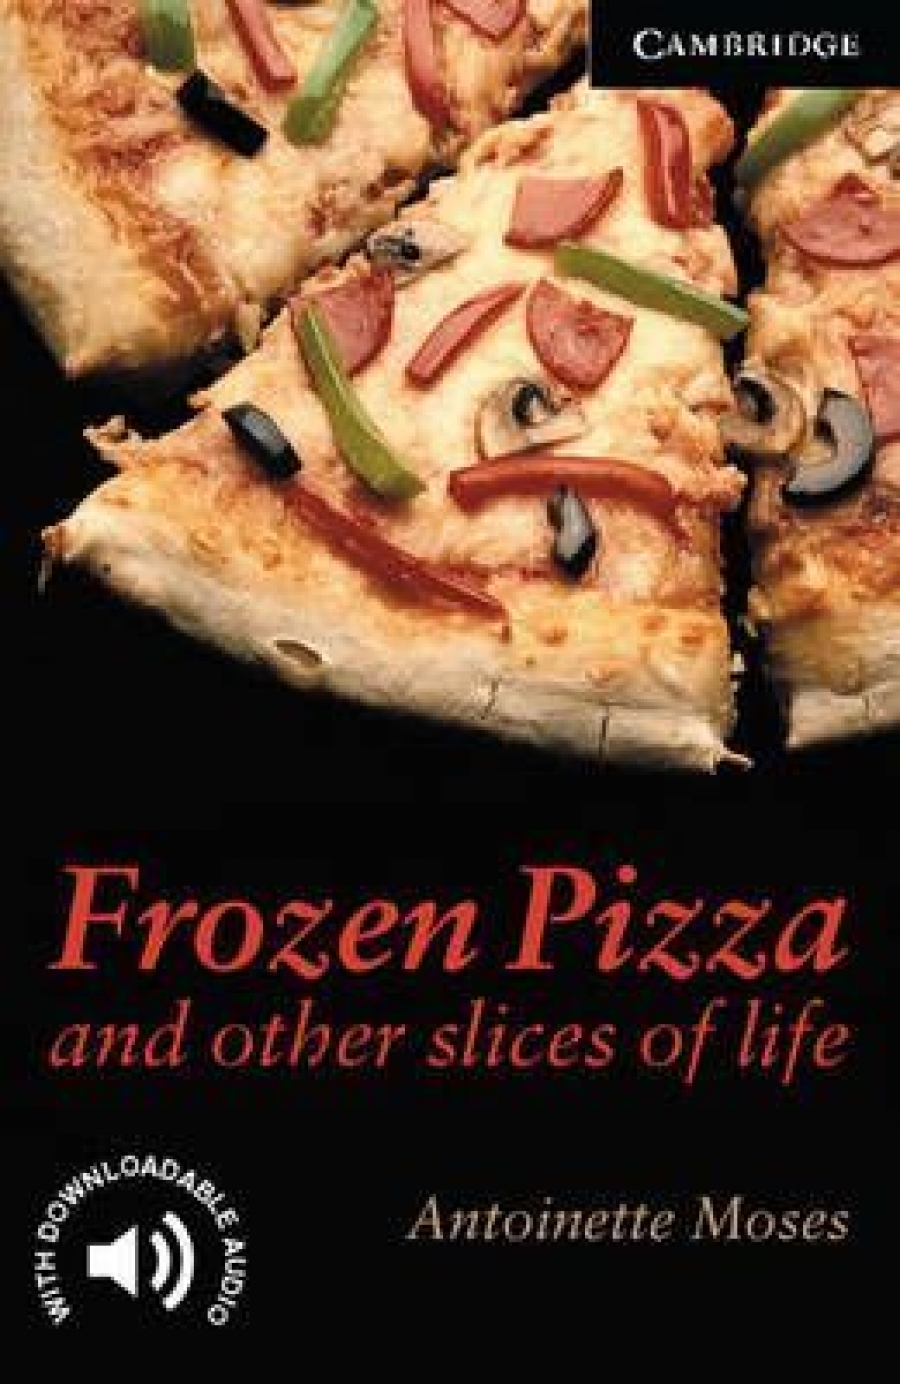 Antoinette Moses Frozen Pizza and Other Slices of Life 